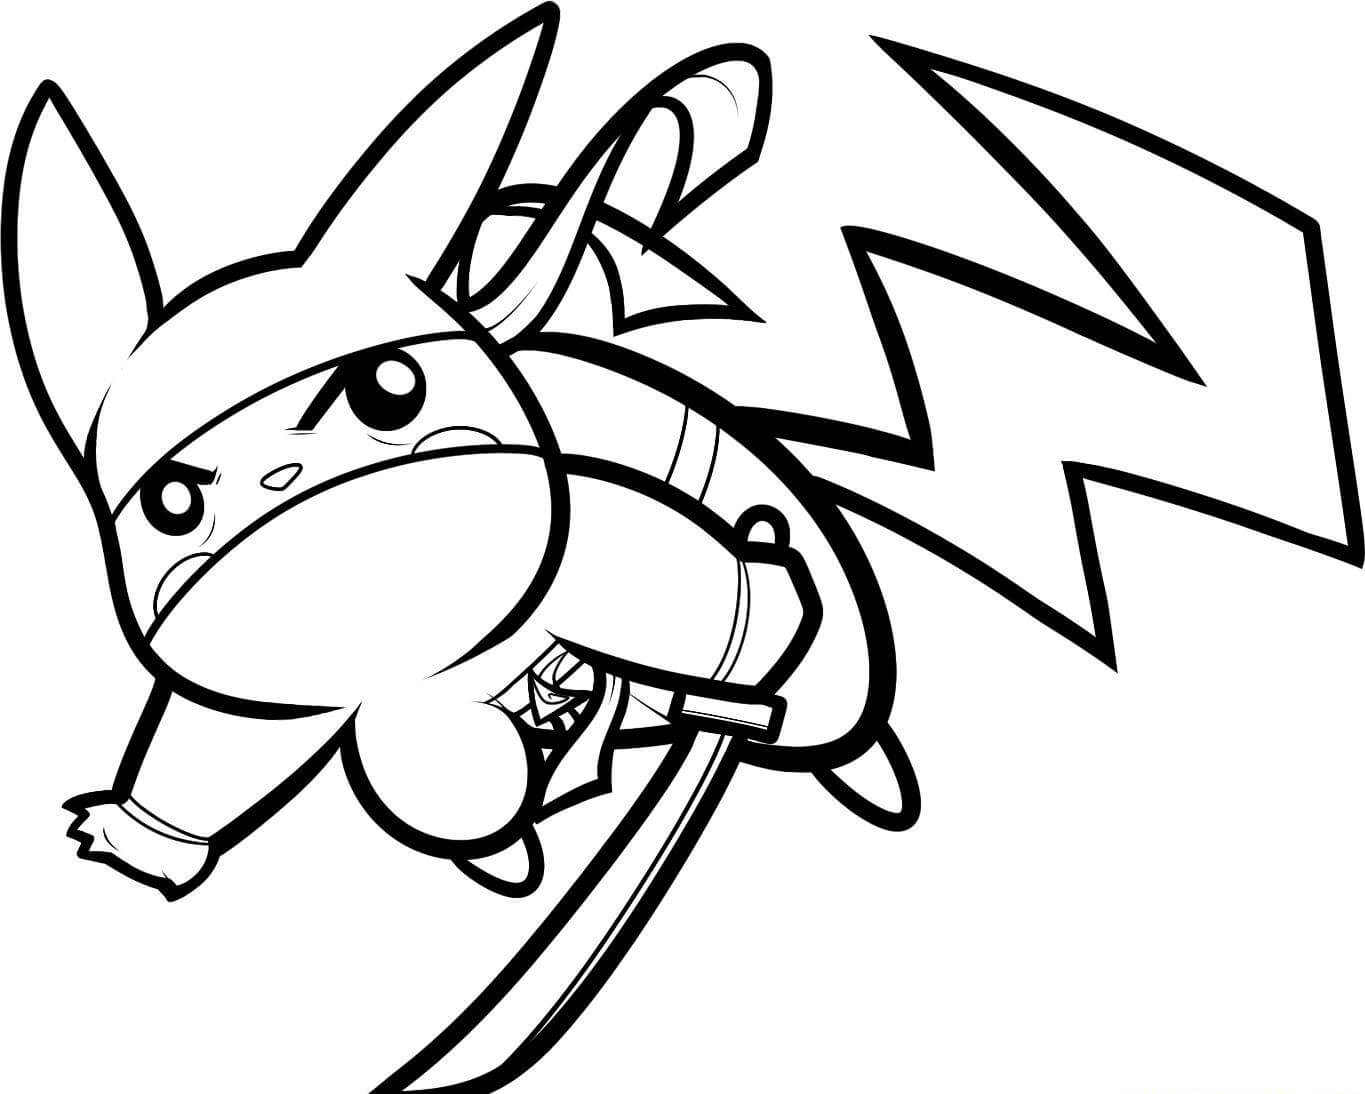 Ninja Pikachu Coloring Page - Free Printable Coloring Pages for Kids